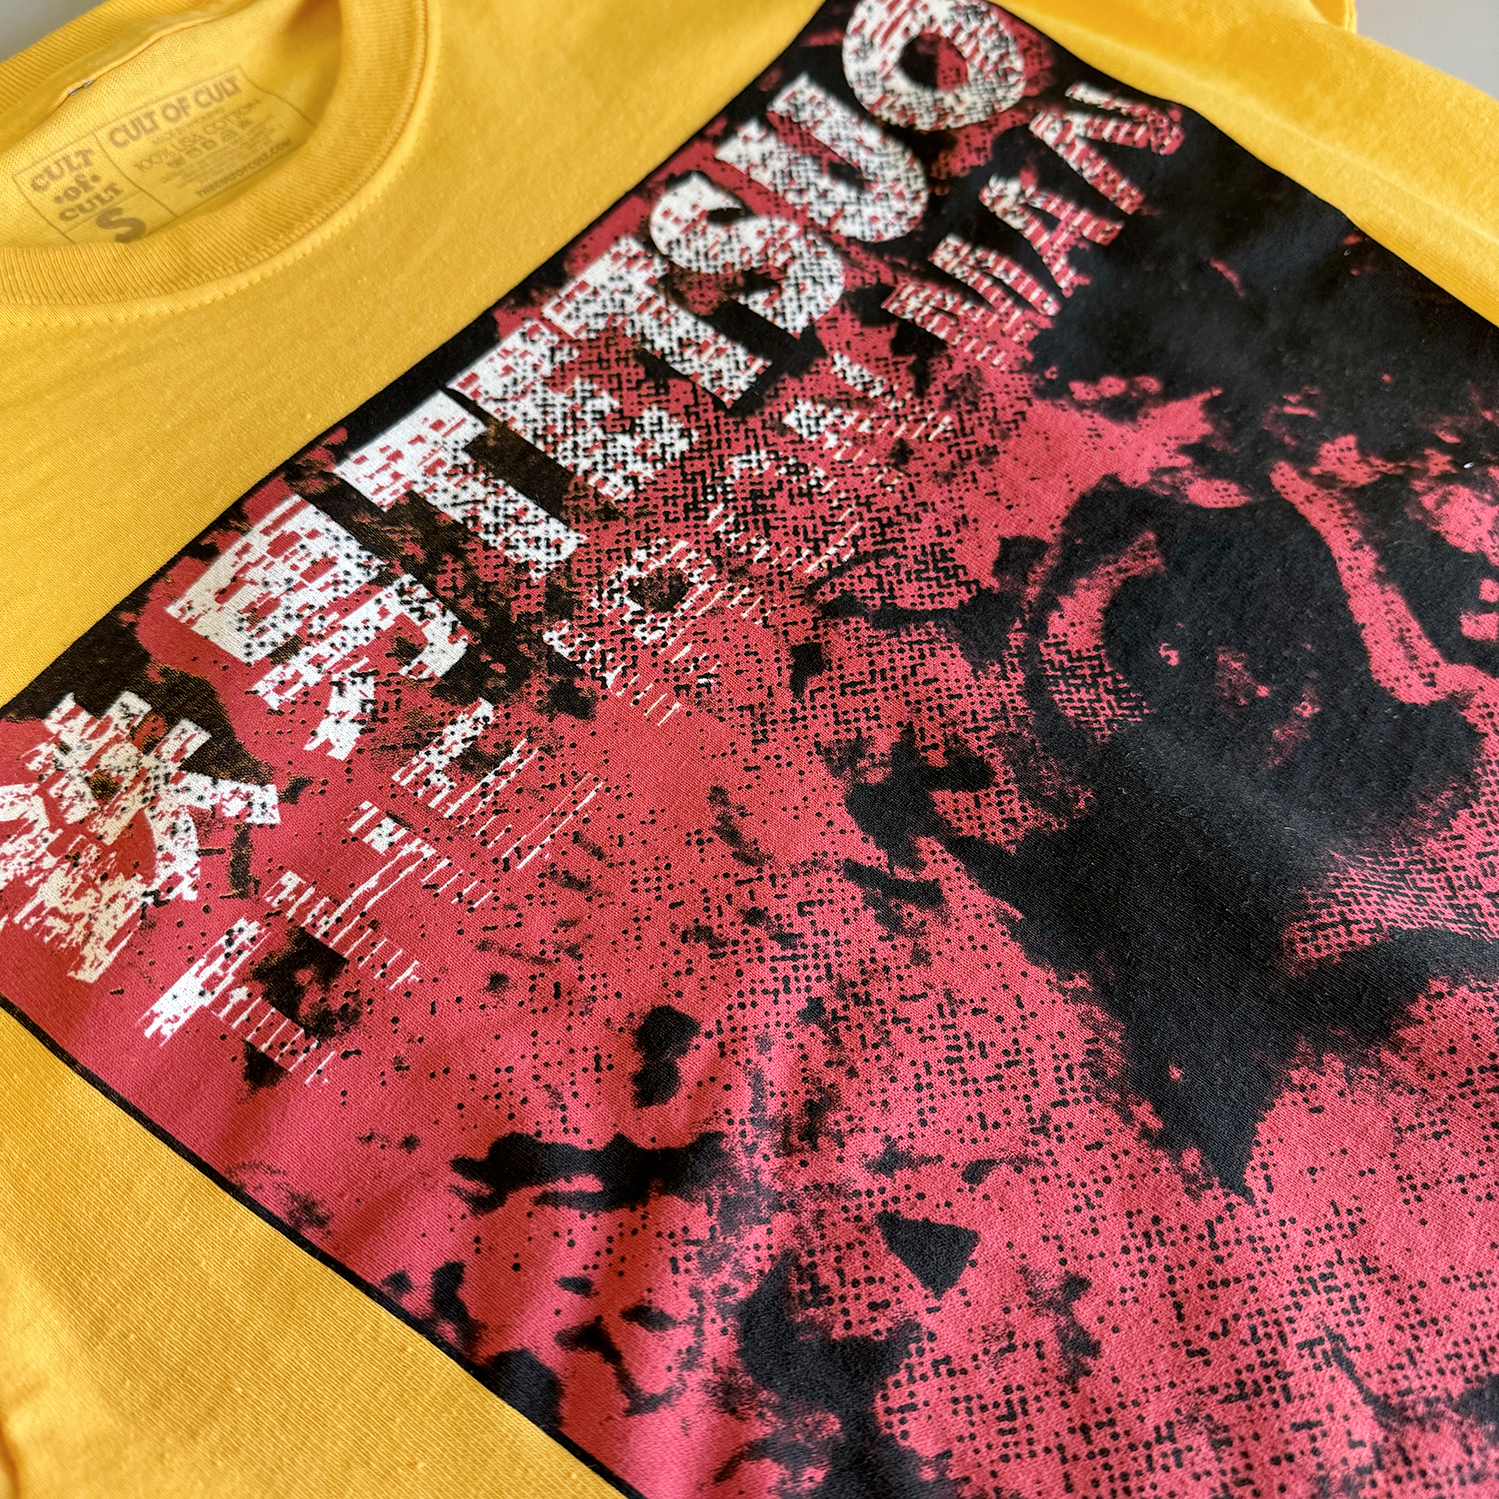 Zoomed in detail of the front of the yellow shirt. The main character is distorted on the front of the shirt, printed in red and black. The front also reads "Tetsuo The Iron Man" in white.